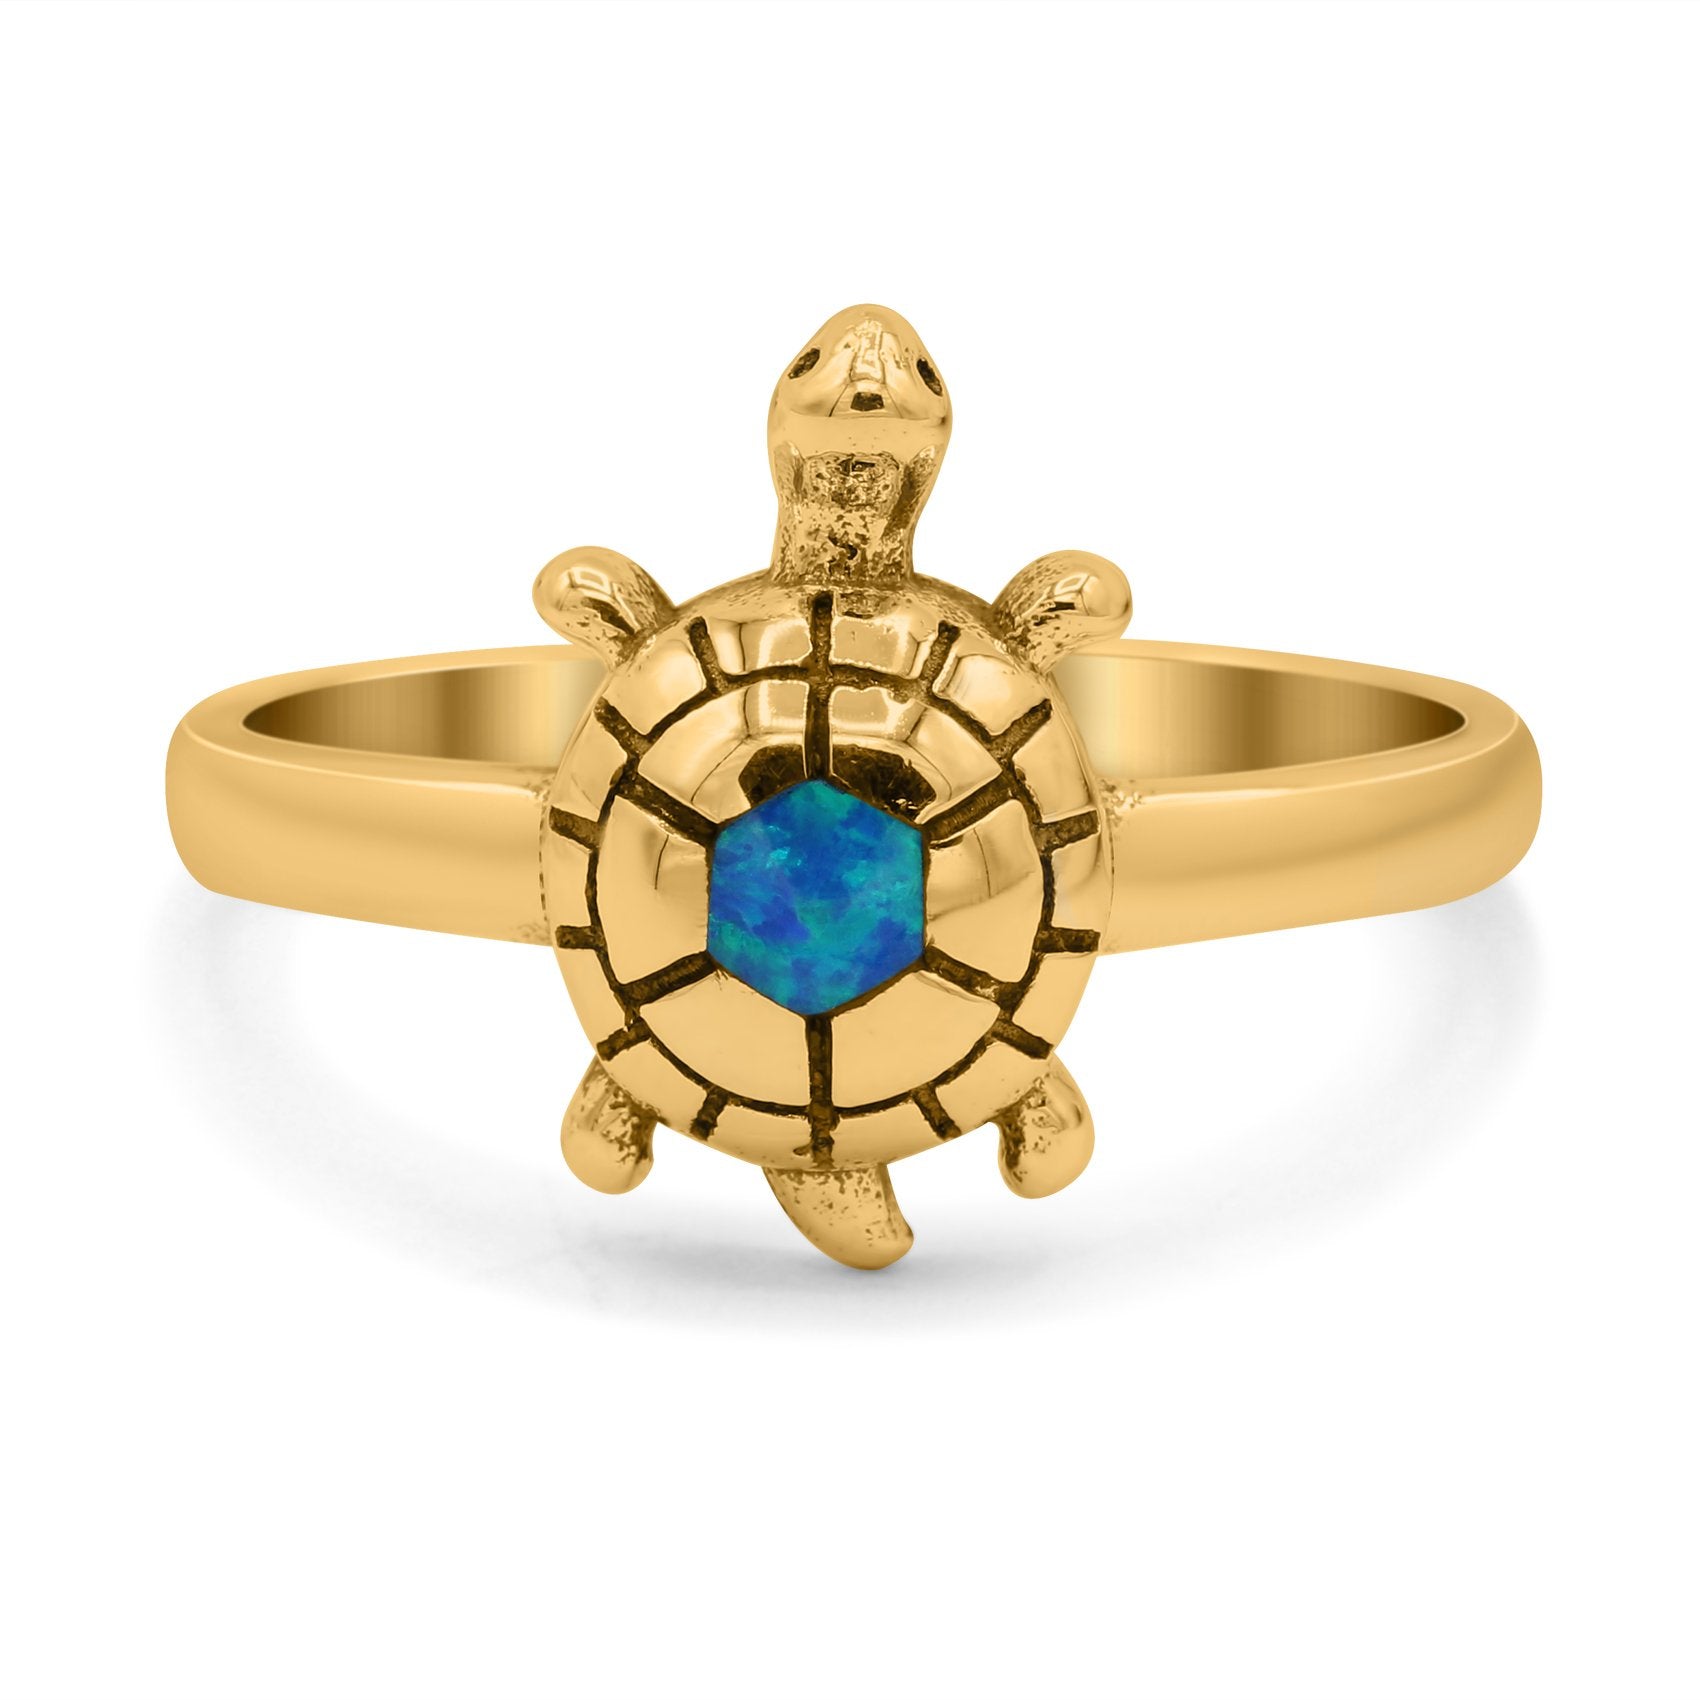 Turtle Ring Lab Created Opal 925 Sterling Silver (13mm)